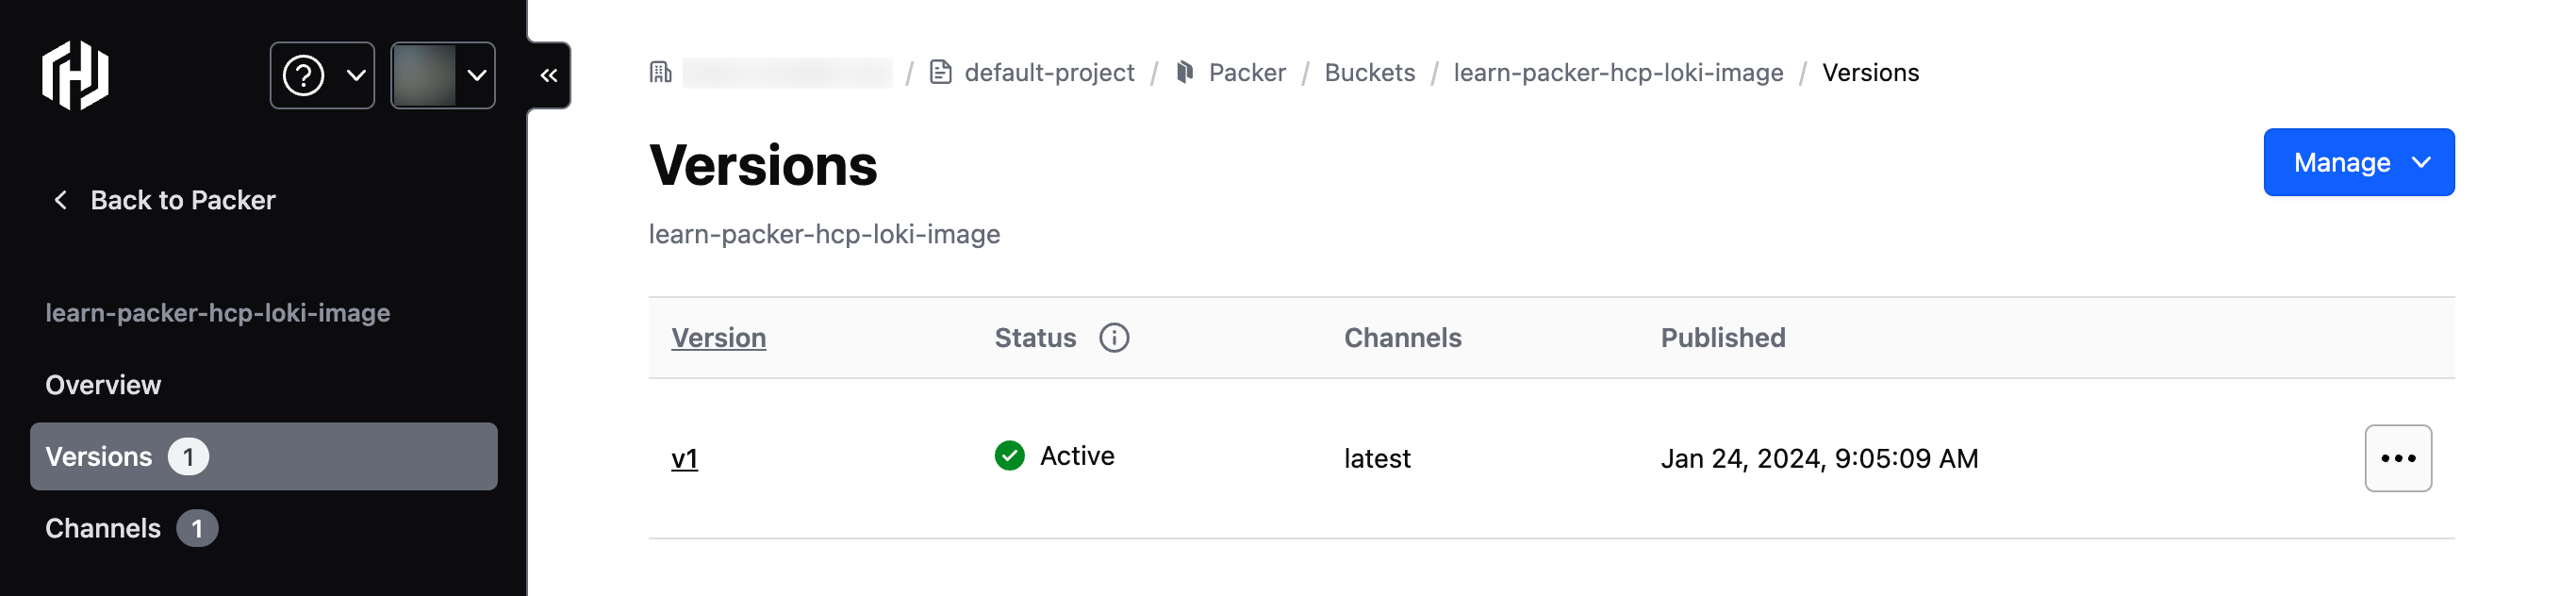 Versions page for bucket named learn-packer-hcp-loki-image